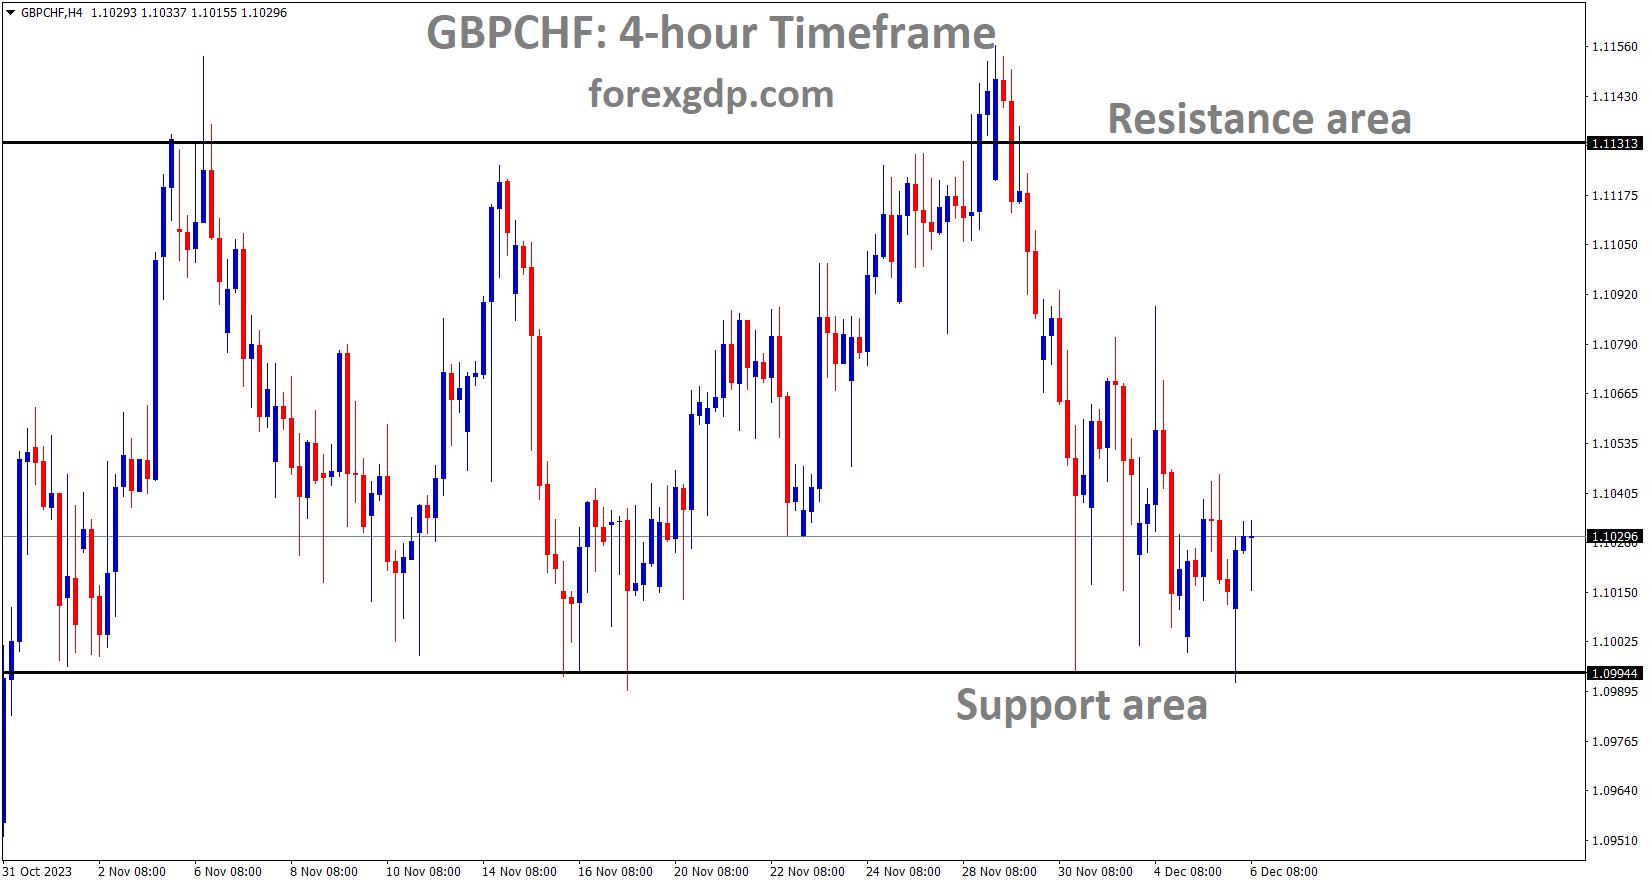 GBPCHF is moving in the Box pattern and the market has rebounded from the support area of the pattern